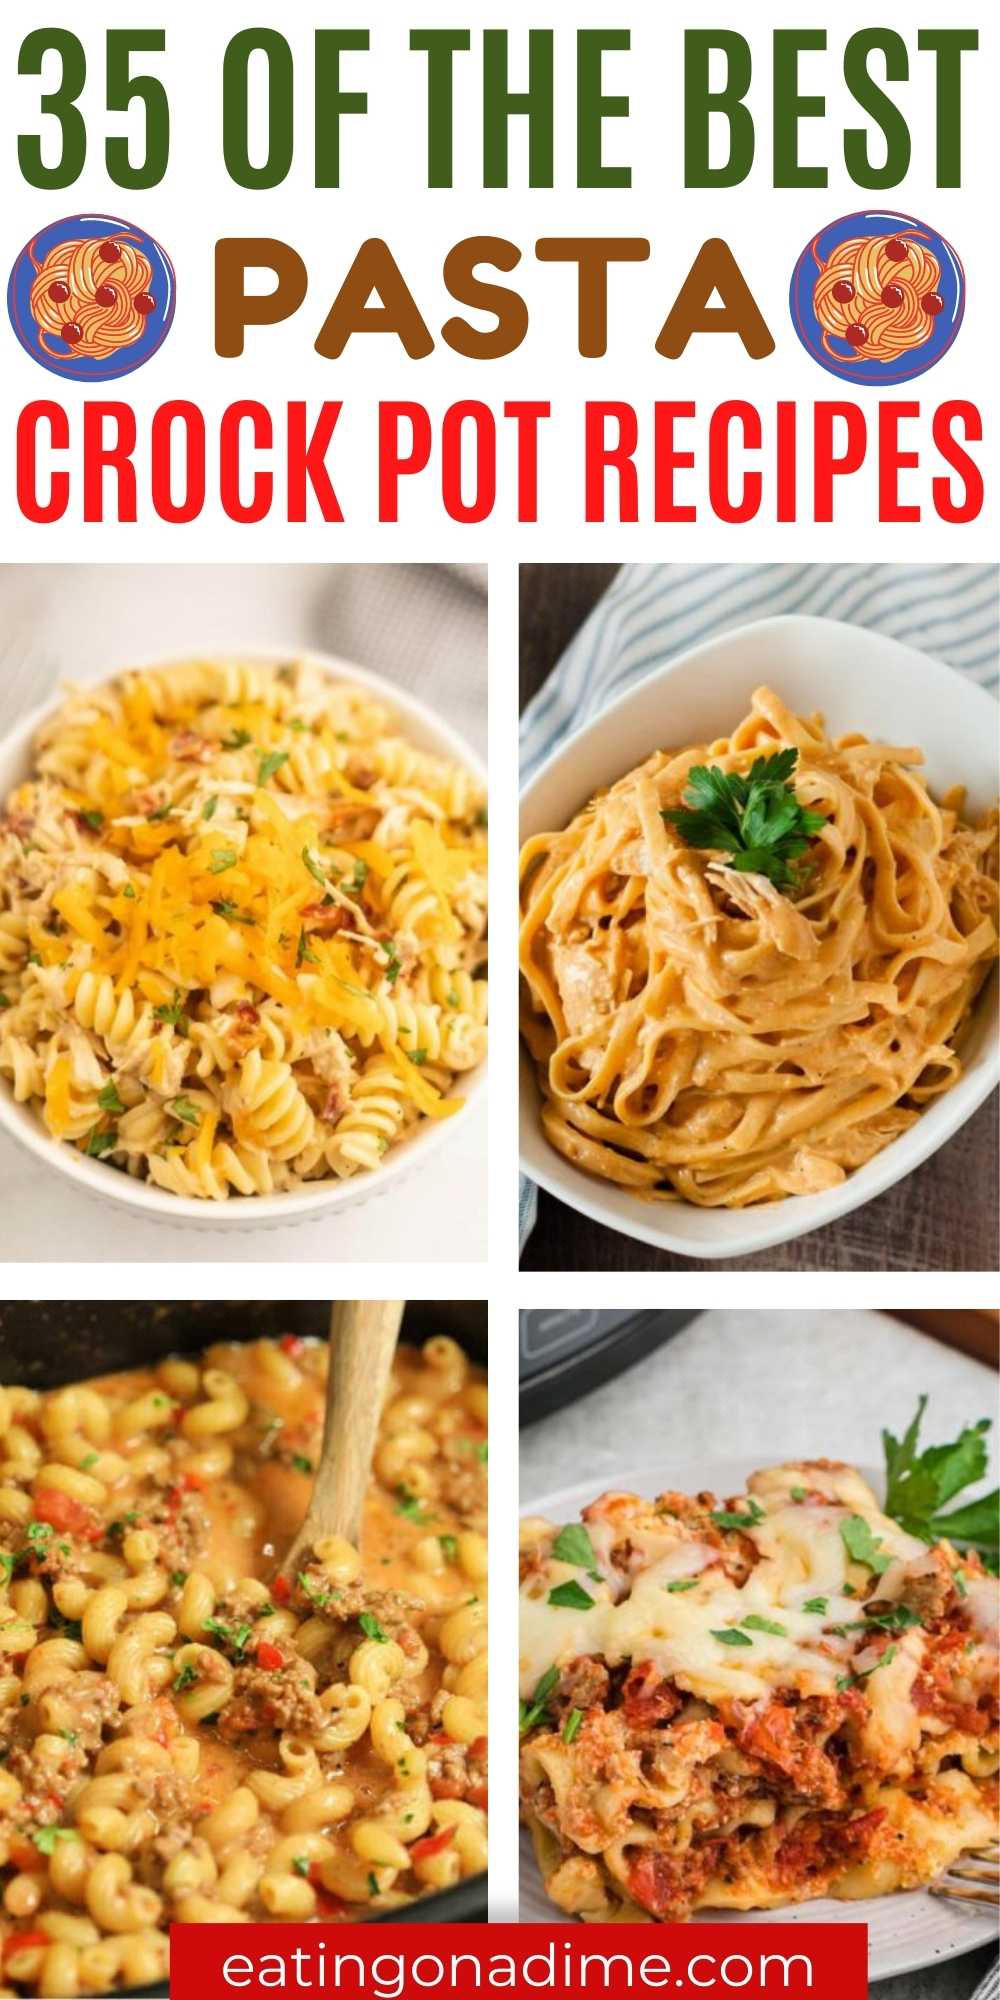 These easy and delicious 35 Crockpot Pasta Recipes are delicious and are made with simple ingredients. These pasta dishes are easily made in your slow cooker. Creamy delicious pasta dishes the perfect weeknight meal. #eatingonadime #pastacrockpotrecipes #pastadish